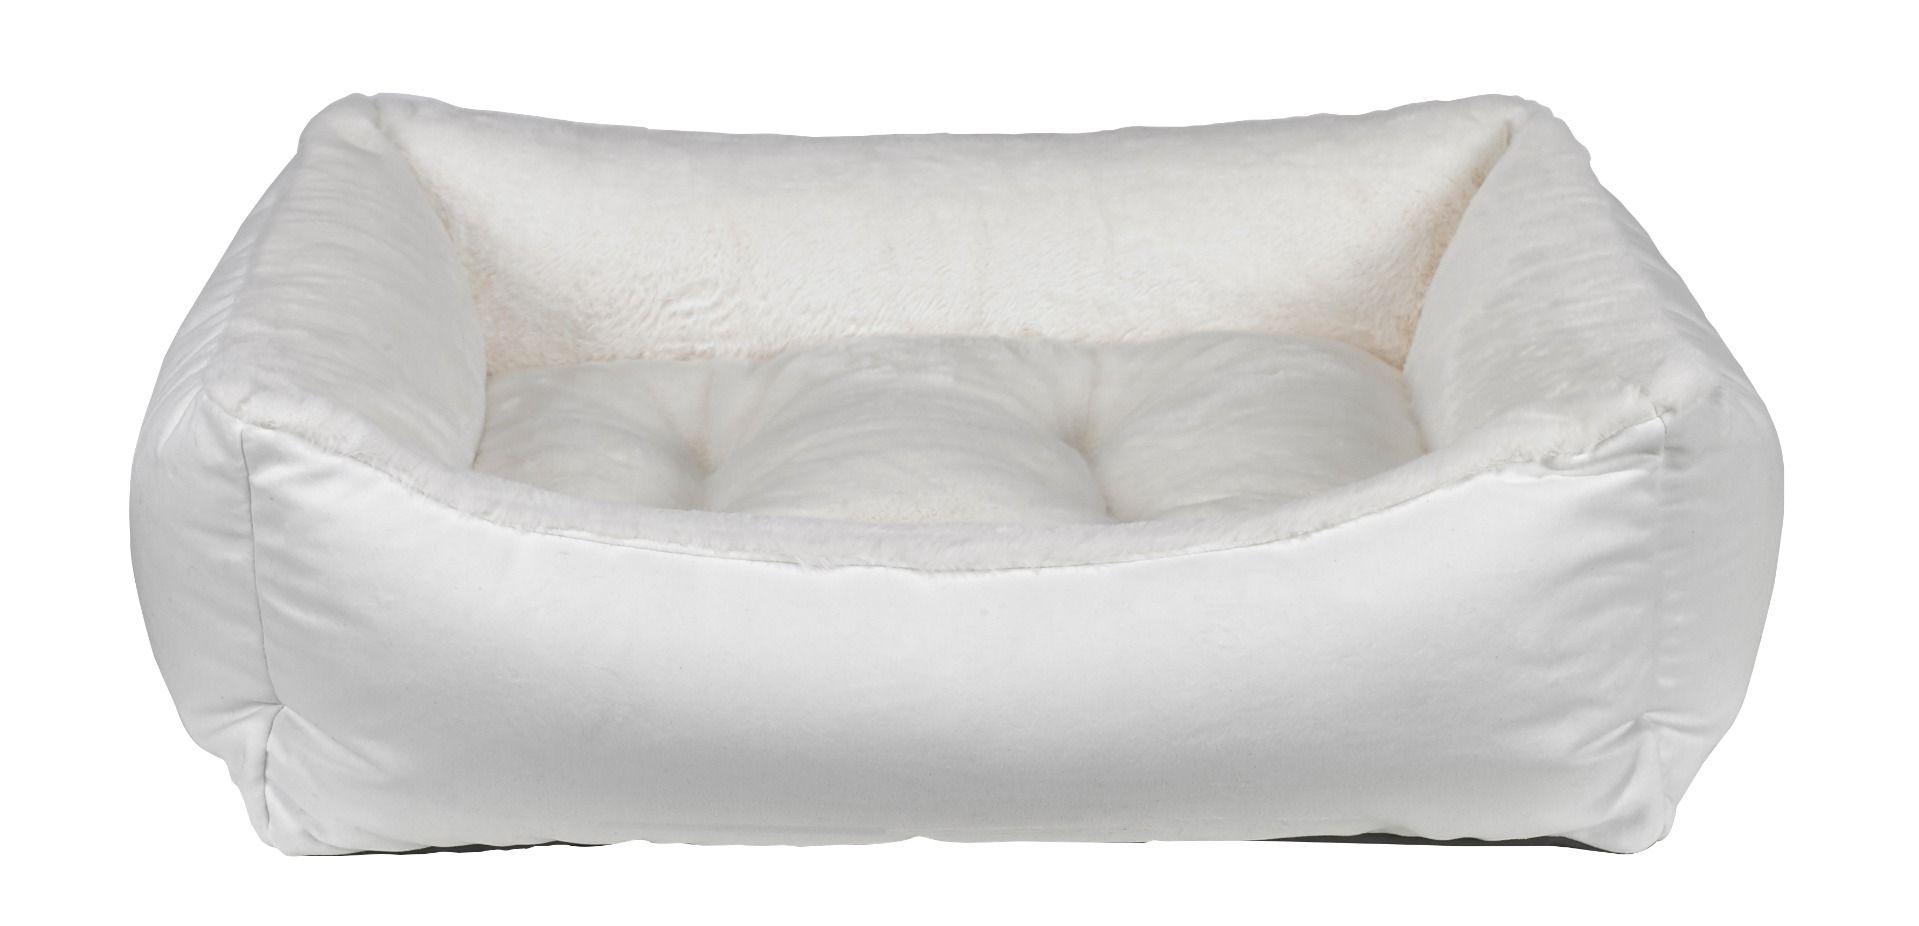 White Scoop shaped Dog Bed from Bowsers in 4 sizes for a brave dog owner